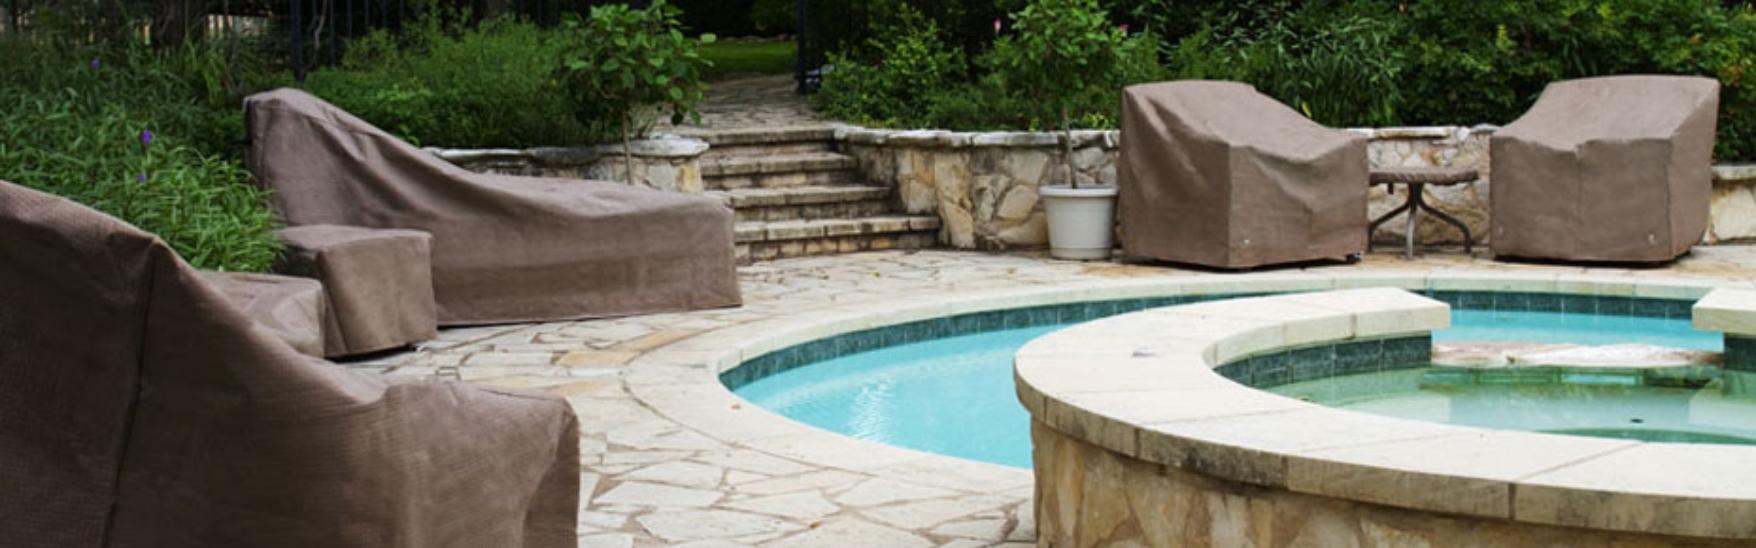 Patio Tips: How to Protect Your Outdoor Furniture